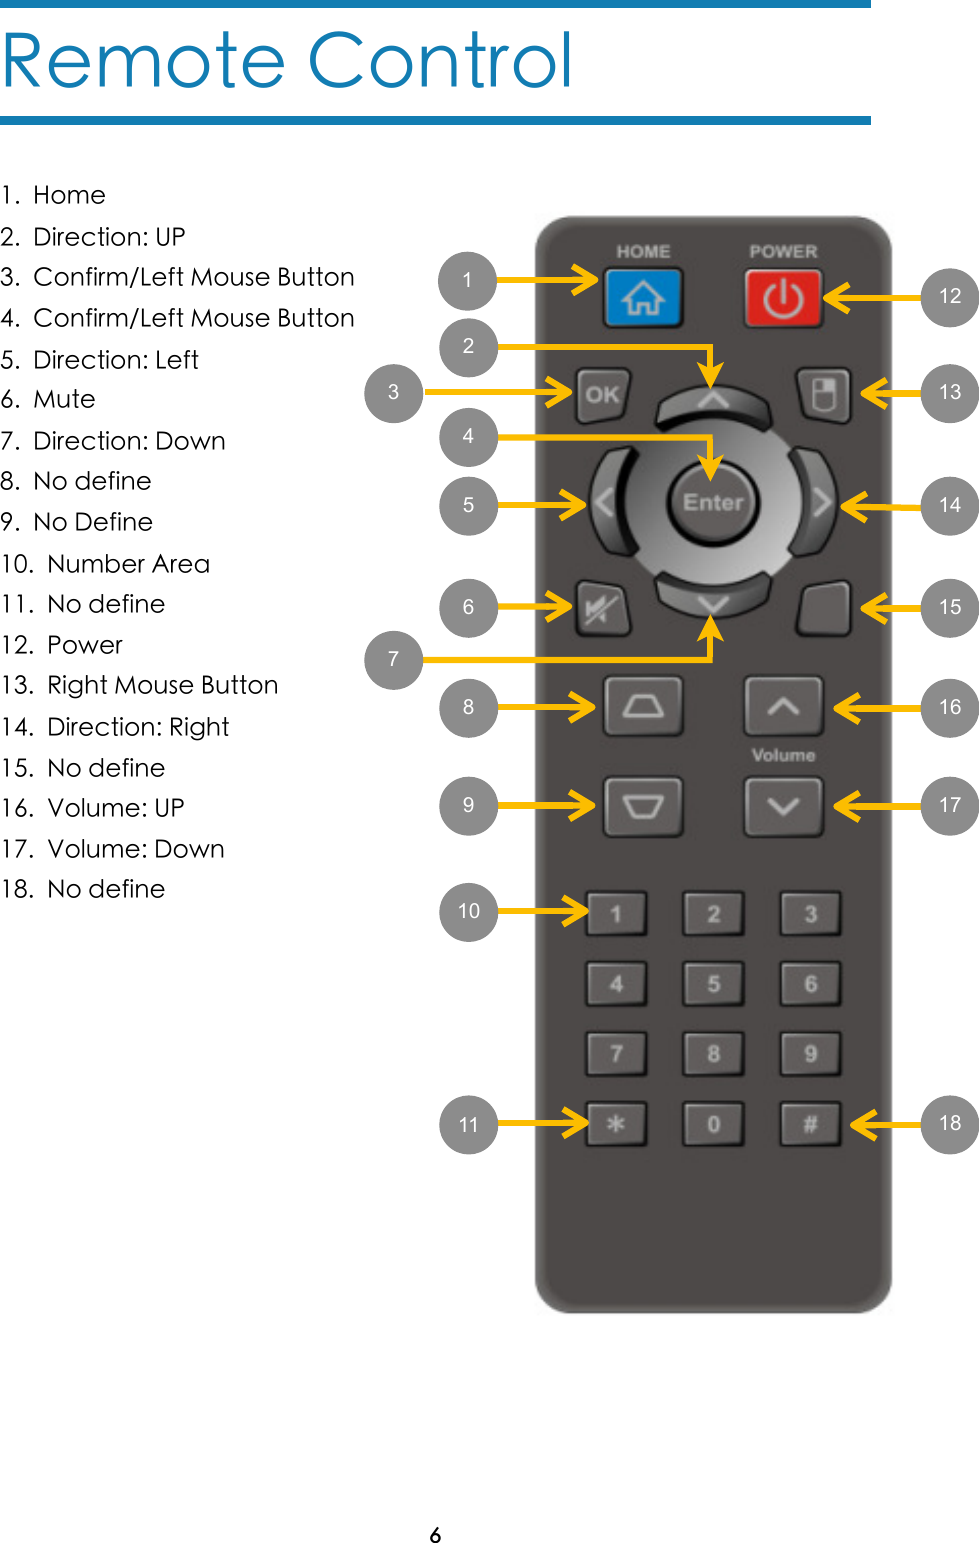 Remote Control1.  Home2.  Direction: UP3.  Confirm/Left Mouse Button4.  Confirm/Left Mouse Button5.  Direction: Left6.  Mute7.  Direction: Down8.  No define9.  No Define10.  Number Area11.  No define12.  Power13.  Right Mouse Button14.  Direction: Right15.  No define16.  Volume: UP17.  Volume: Down18.  No define 6124567389101112131415161718